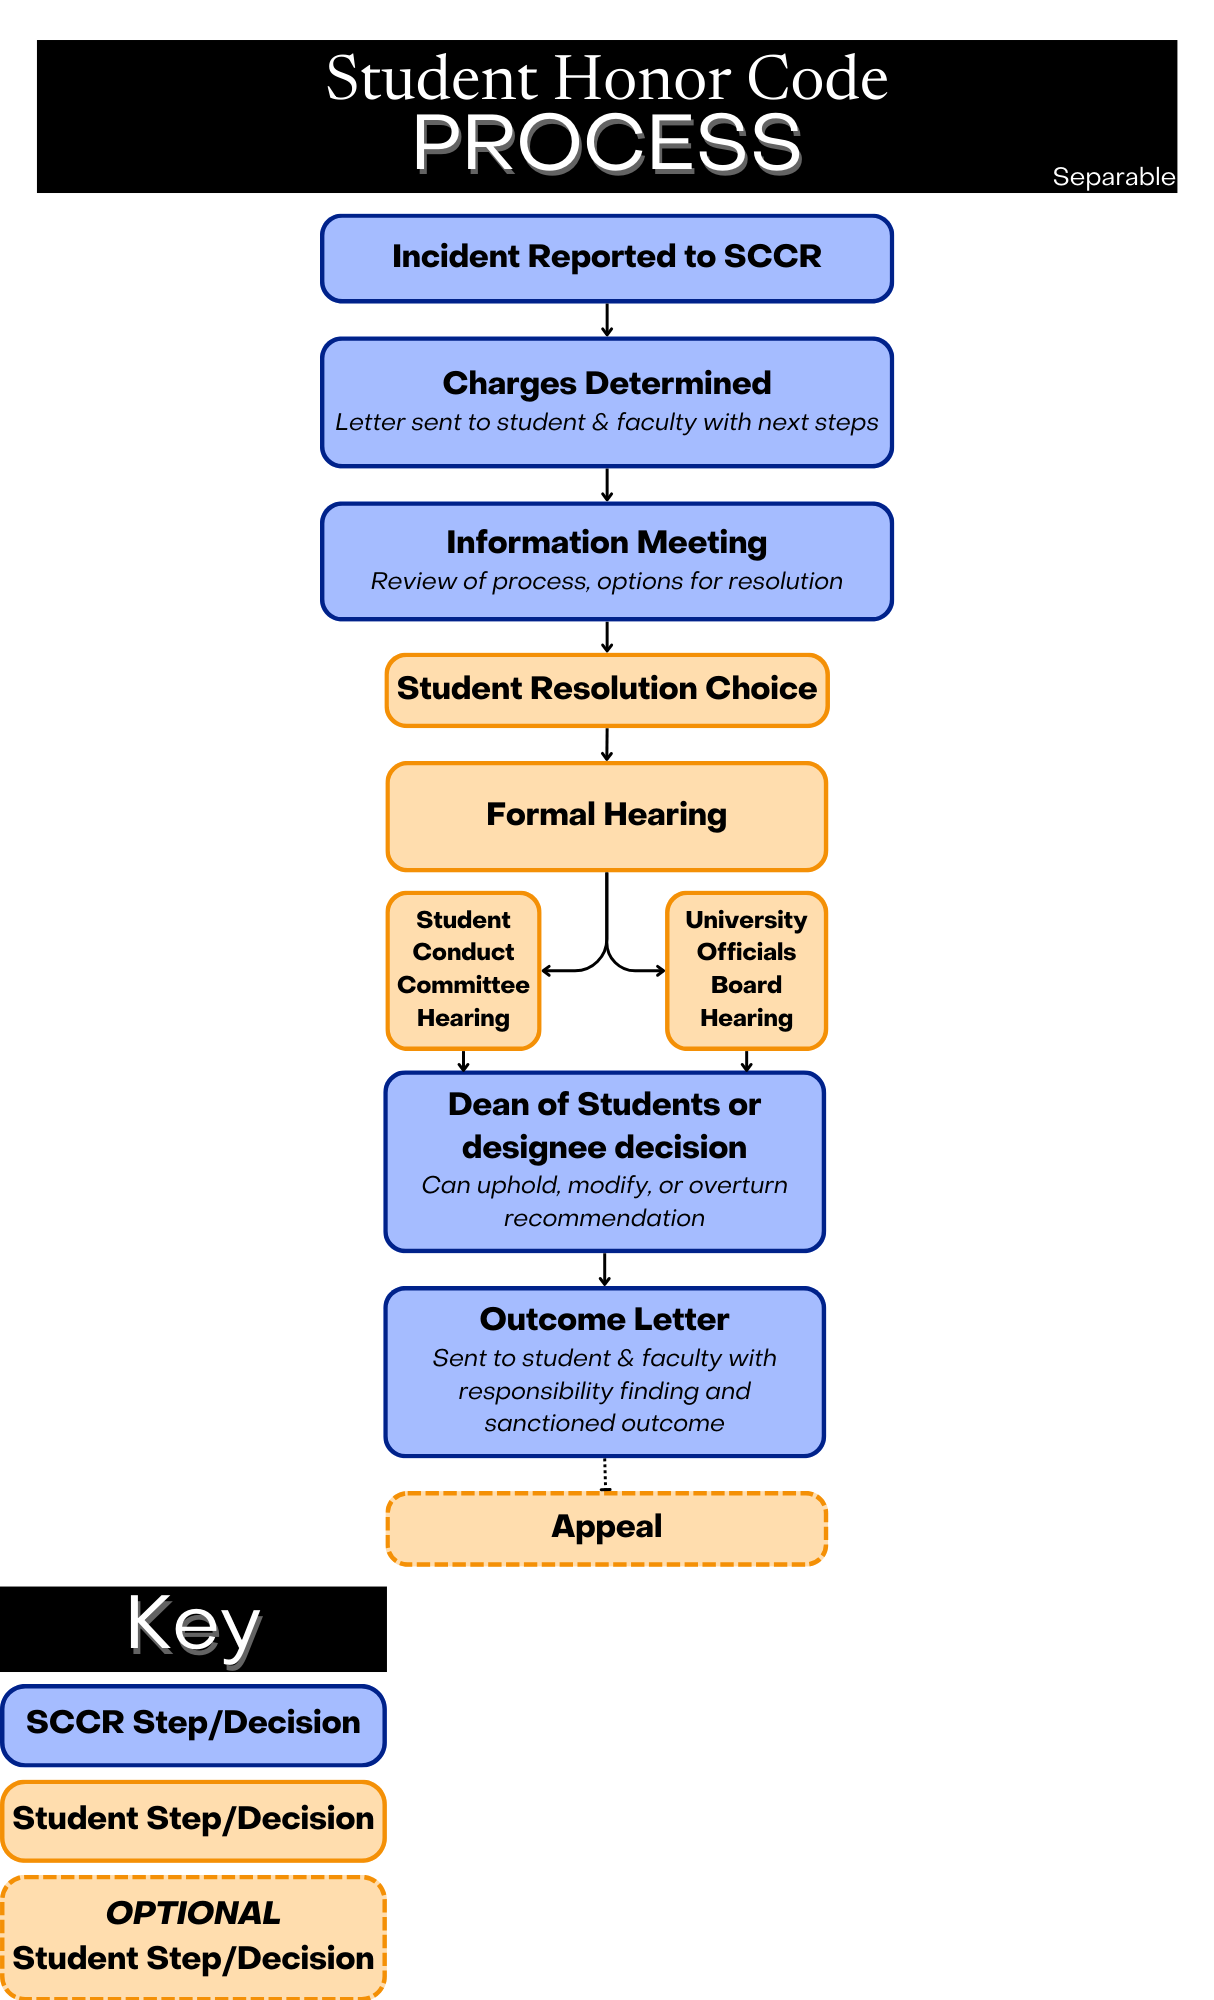 This is an image depicting the Student Honor Code process, as explained in the Student Conduct Code and Student Honor Code. In summary, once an incident is reported to Student Conduct and Conflict Resolution (SCCR), a charge letter will be issued out and an information meeting will be scheduled. If this is the student’s first violation, the student can either accept or deny responsibility. If the student accepts responsibility and the sanctions proposed by faculty, an outcome letter is sent to the student. The student can then fulfill the sanctions or appeal the decision. If the student selects “not responsible” to the charges or “do not agree” to the sanctions proposed, a Student Conduct Committee hearing will be scheduled. After the hearing, a recommendation will be sent to the Dean of Students or designee for a decision. An outcome letter will be sent to the student. The student can then fulfill the sanctions or appeal the decision. If this is the student’s second violation, a Student Conduct Committee hearing will be scheduled. After the hearing, a recommendation will be sent to the Dean of Students or designee for a decision. An outcome letter will be sent to the student. The student can then fulfill the sanctions or appeal the decision.